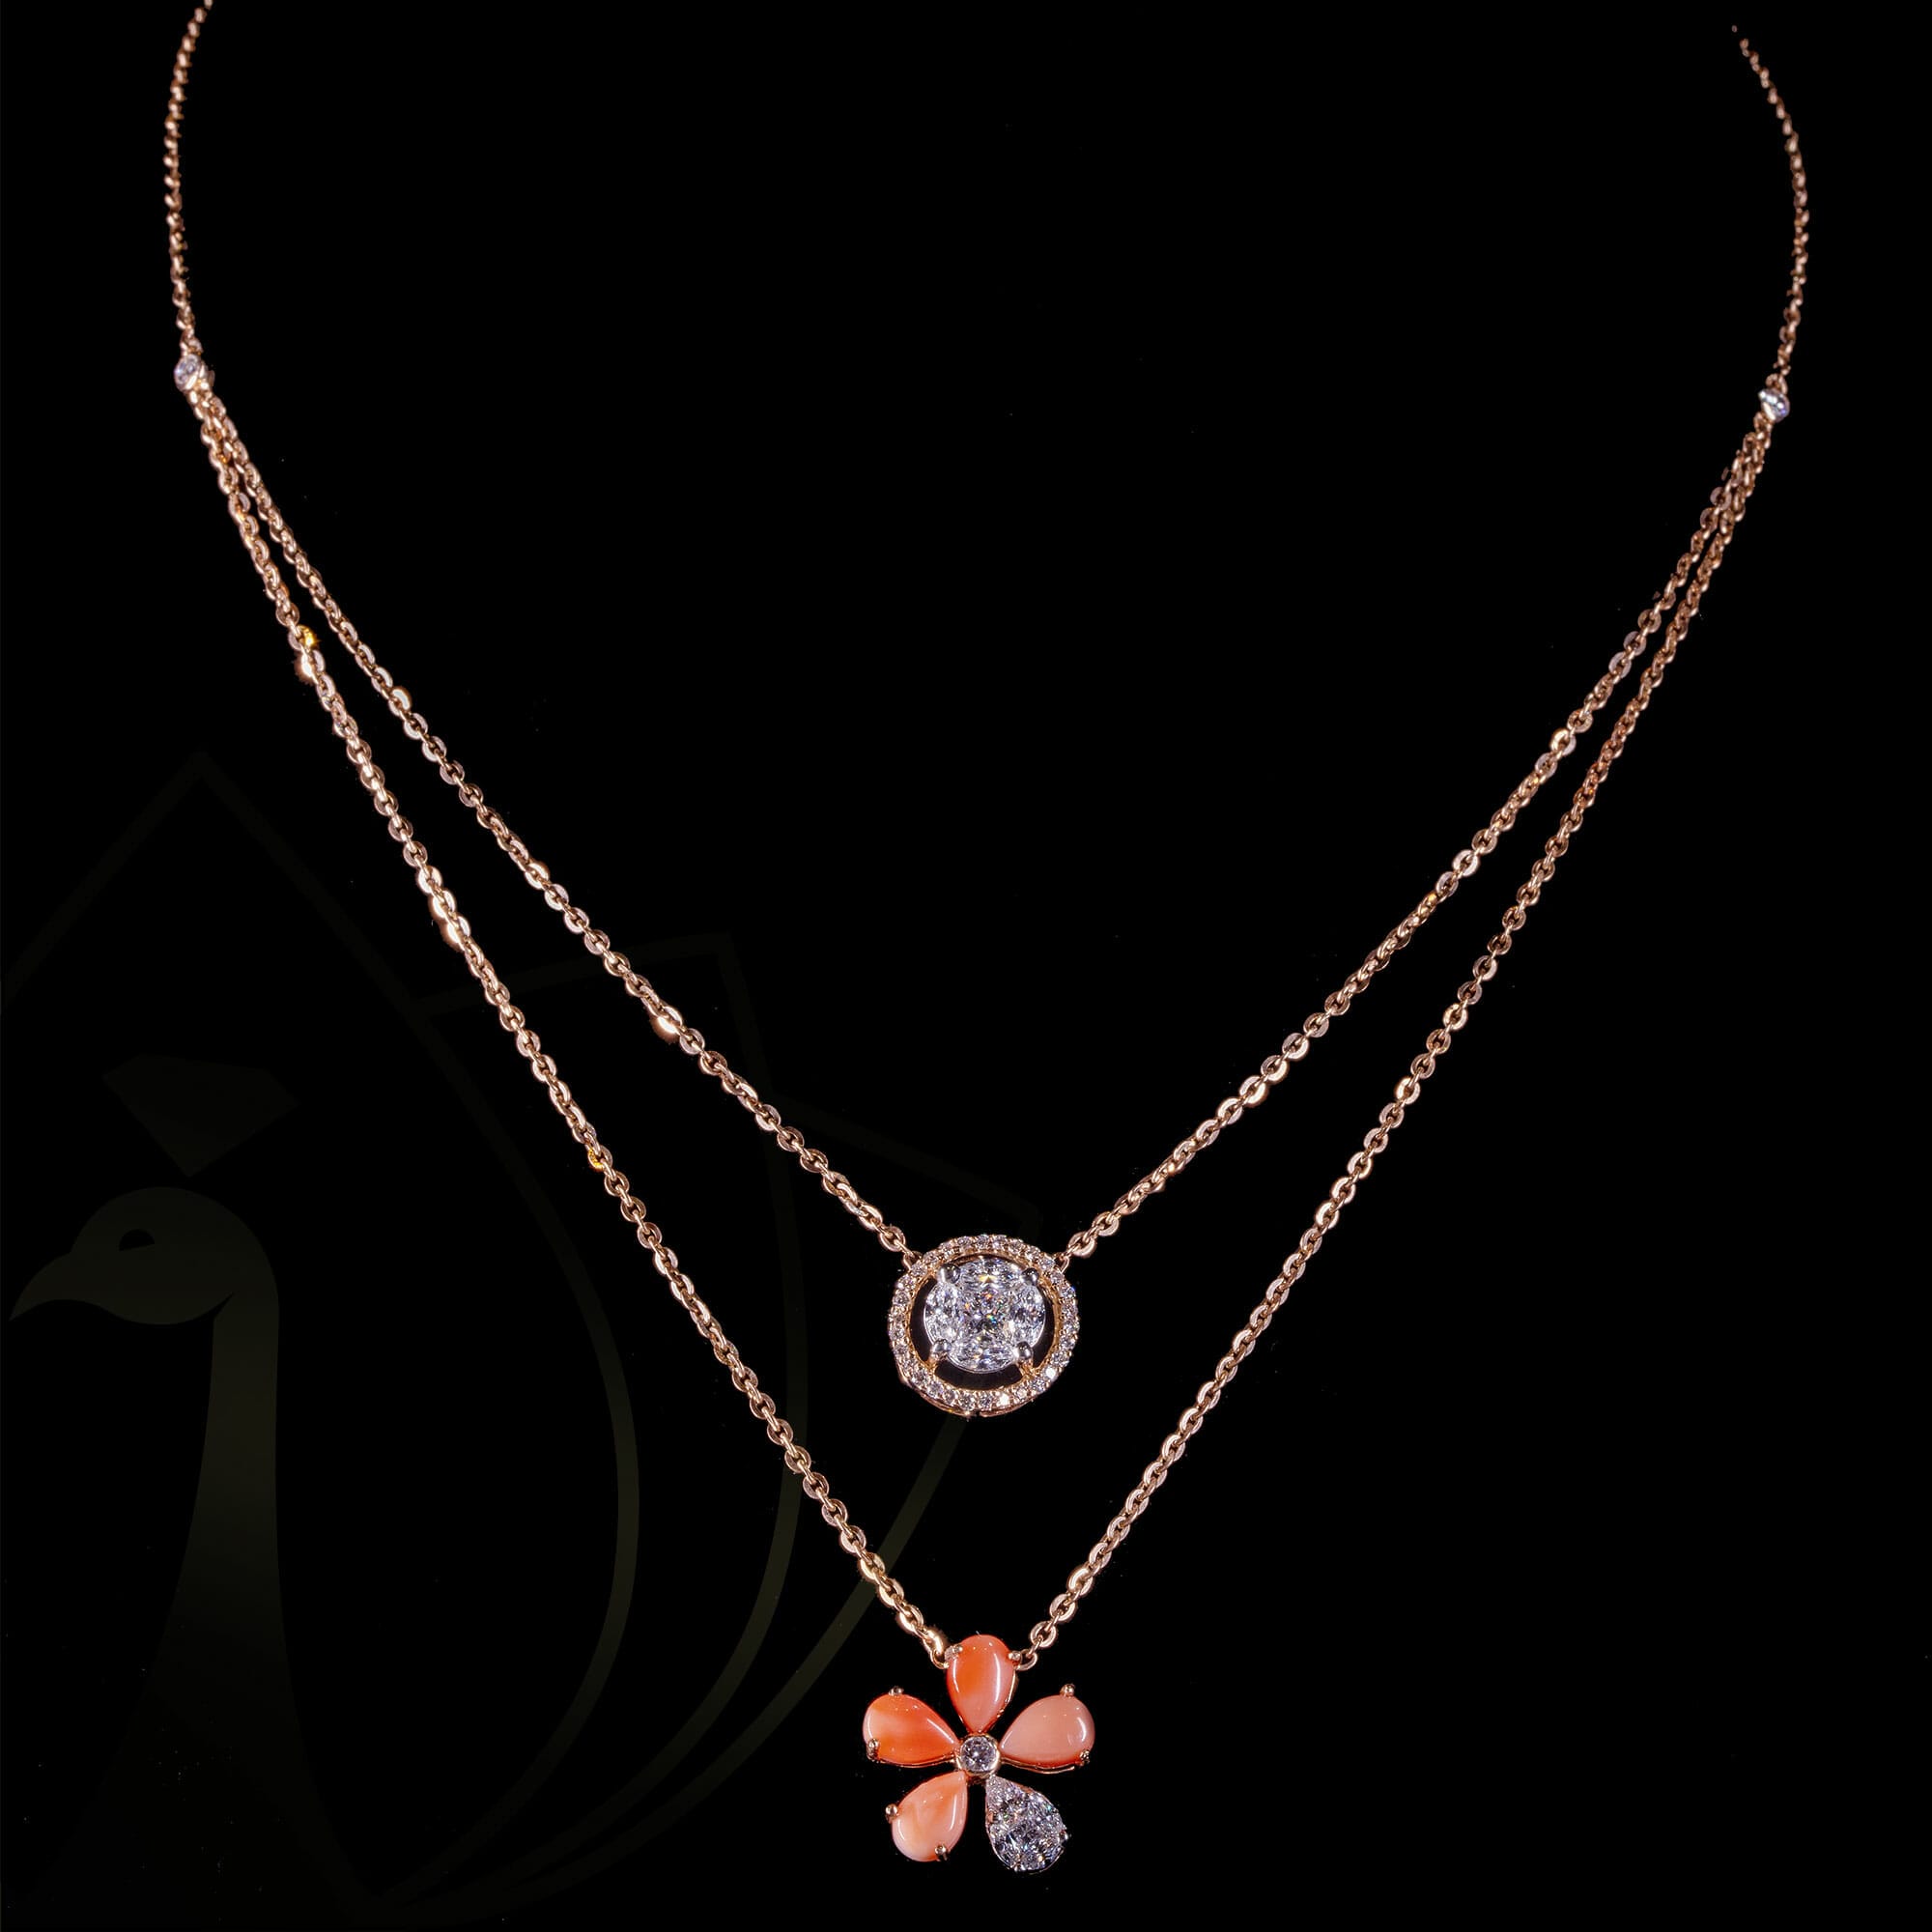 Floral Fiesta Diamond Layered Necklace from our exclusive Gulz Collection